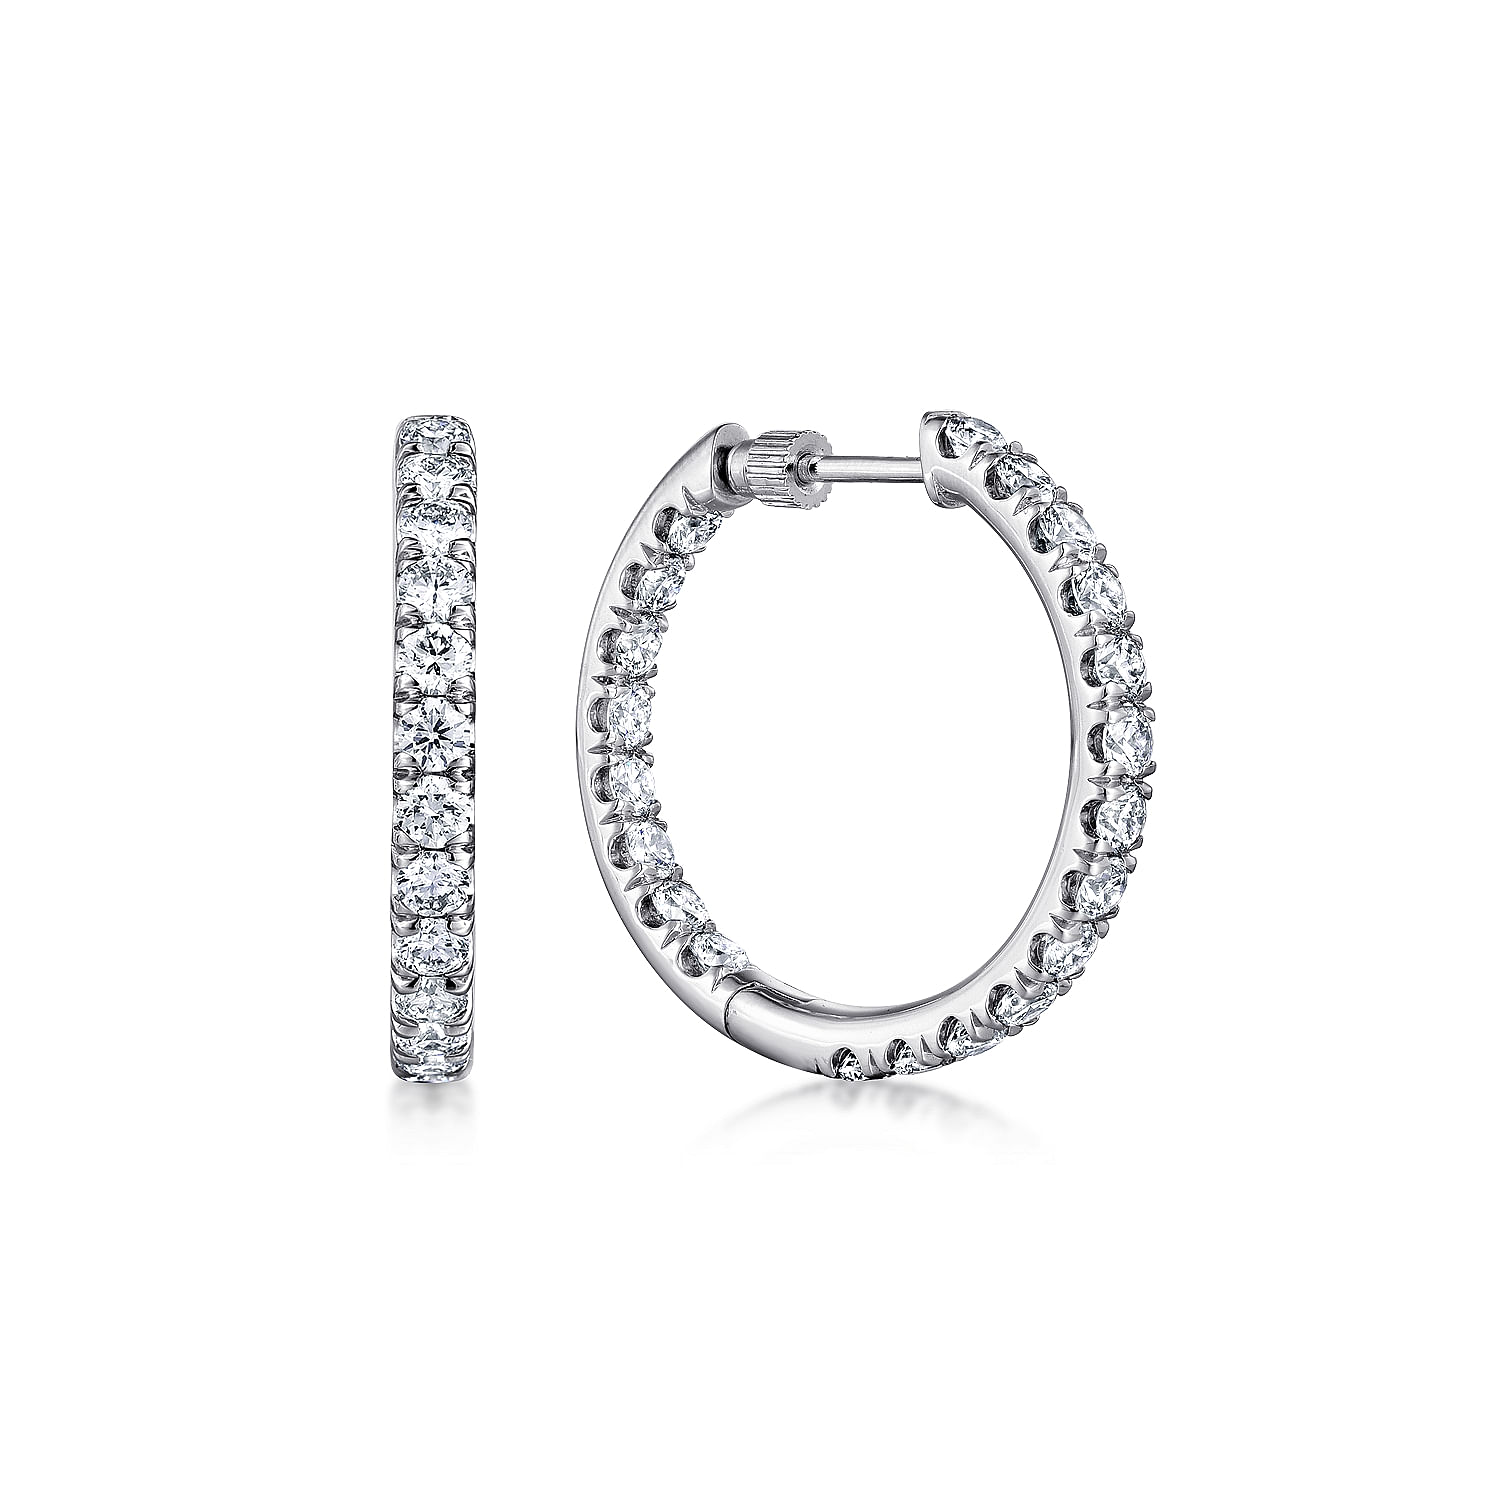 14K White Gold French Pavé 20mm Round Inside Out Diamond Hoop Earrings